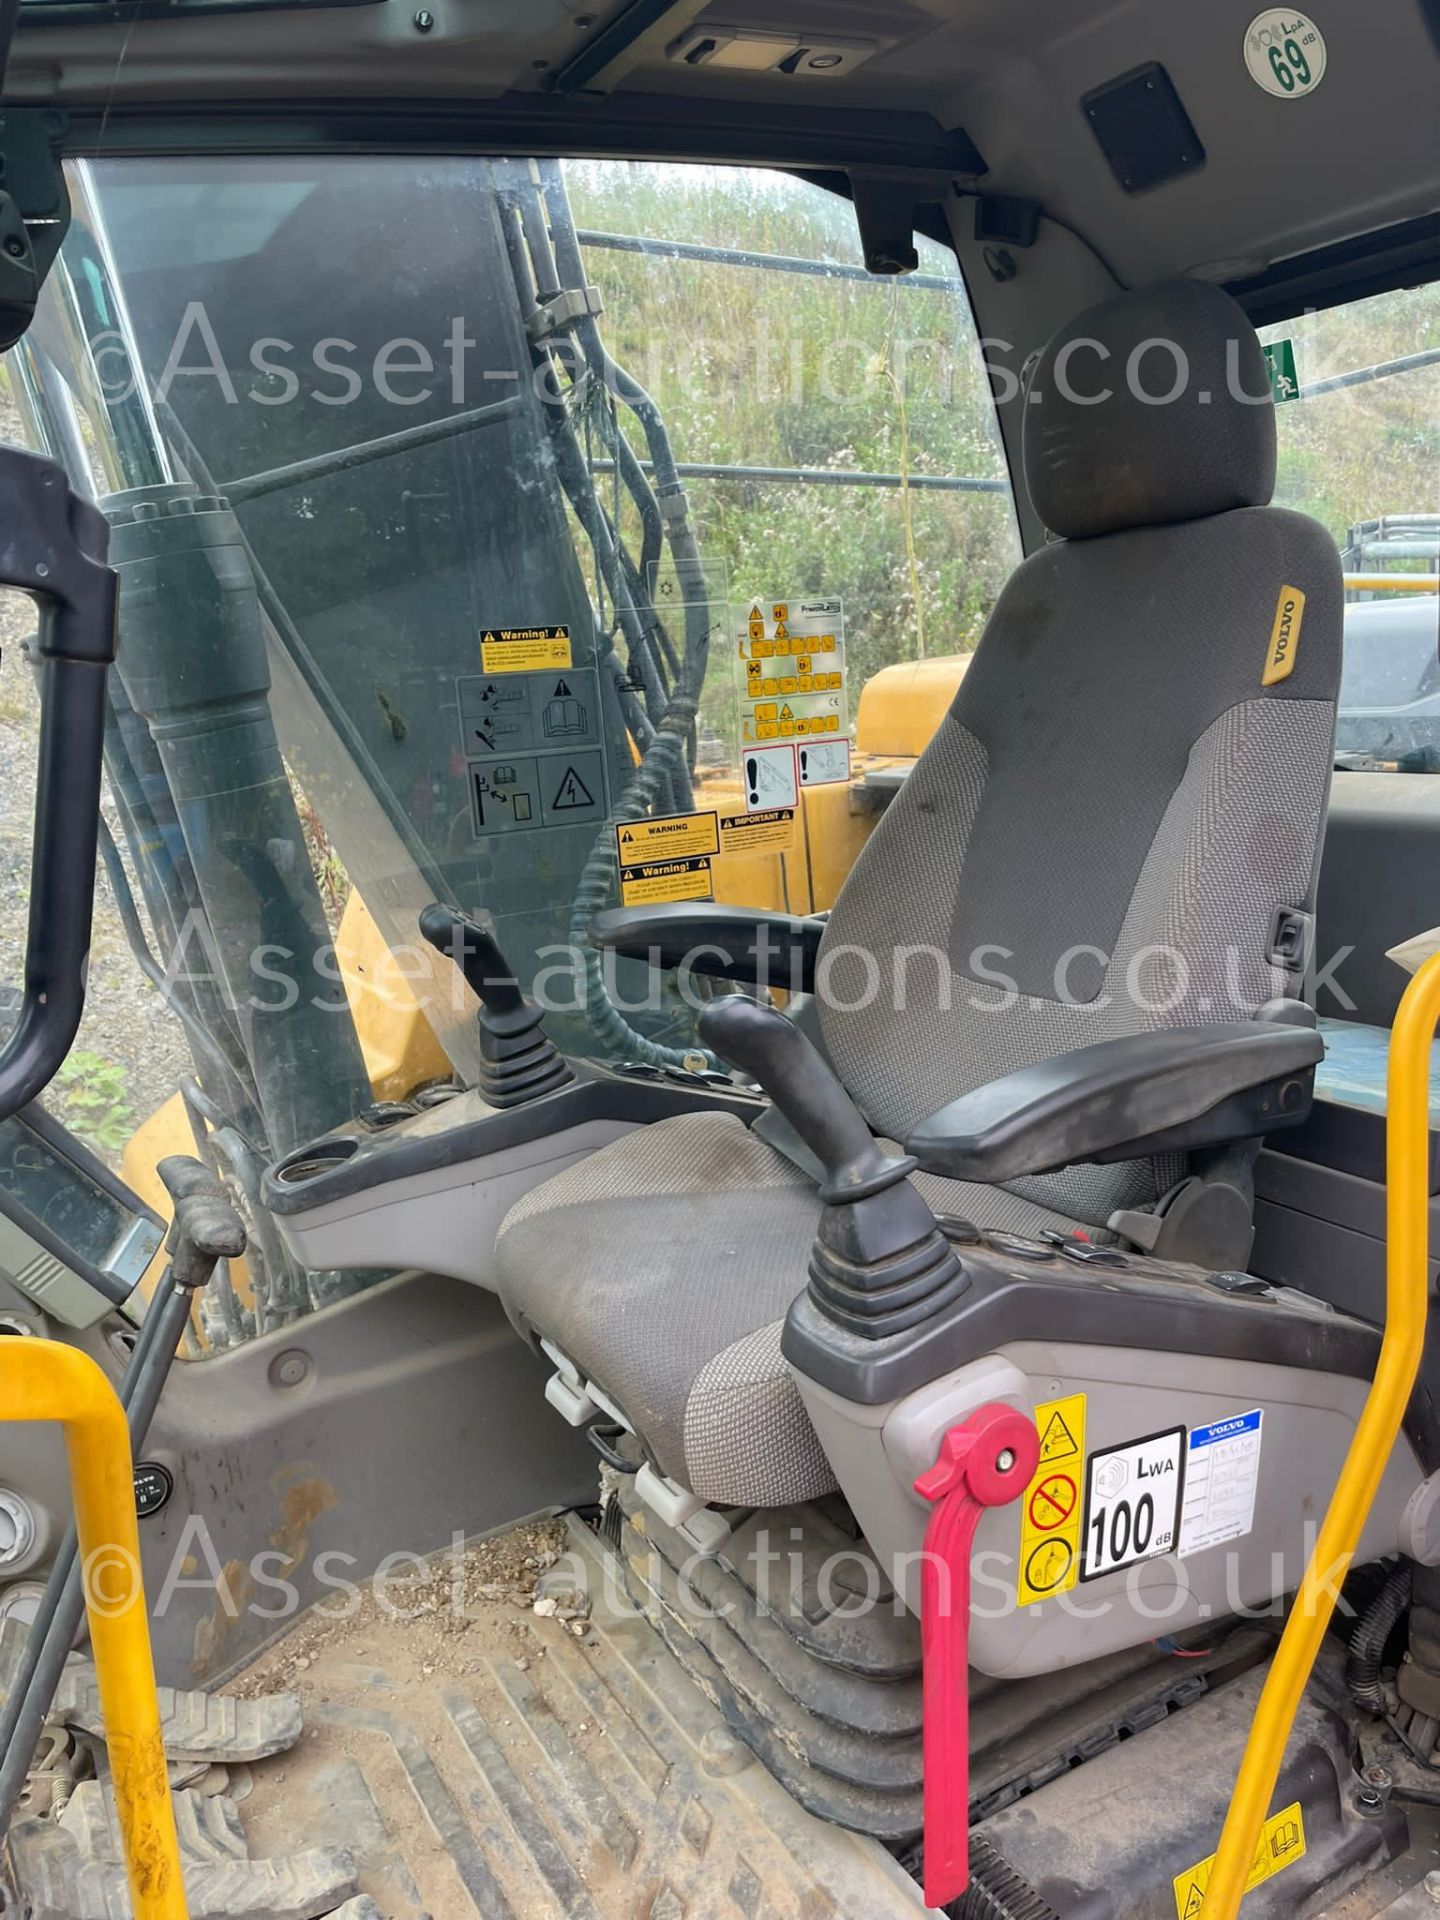 2014 VOLVO EC140DL 14 TON STEEL TRACKED EXCAVATOR, RUNS DRIVES AND DIGS, FULLY GLASS CAB *PLUS VAT* - Image 13 of 14